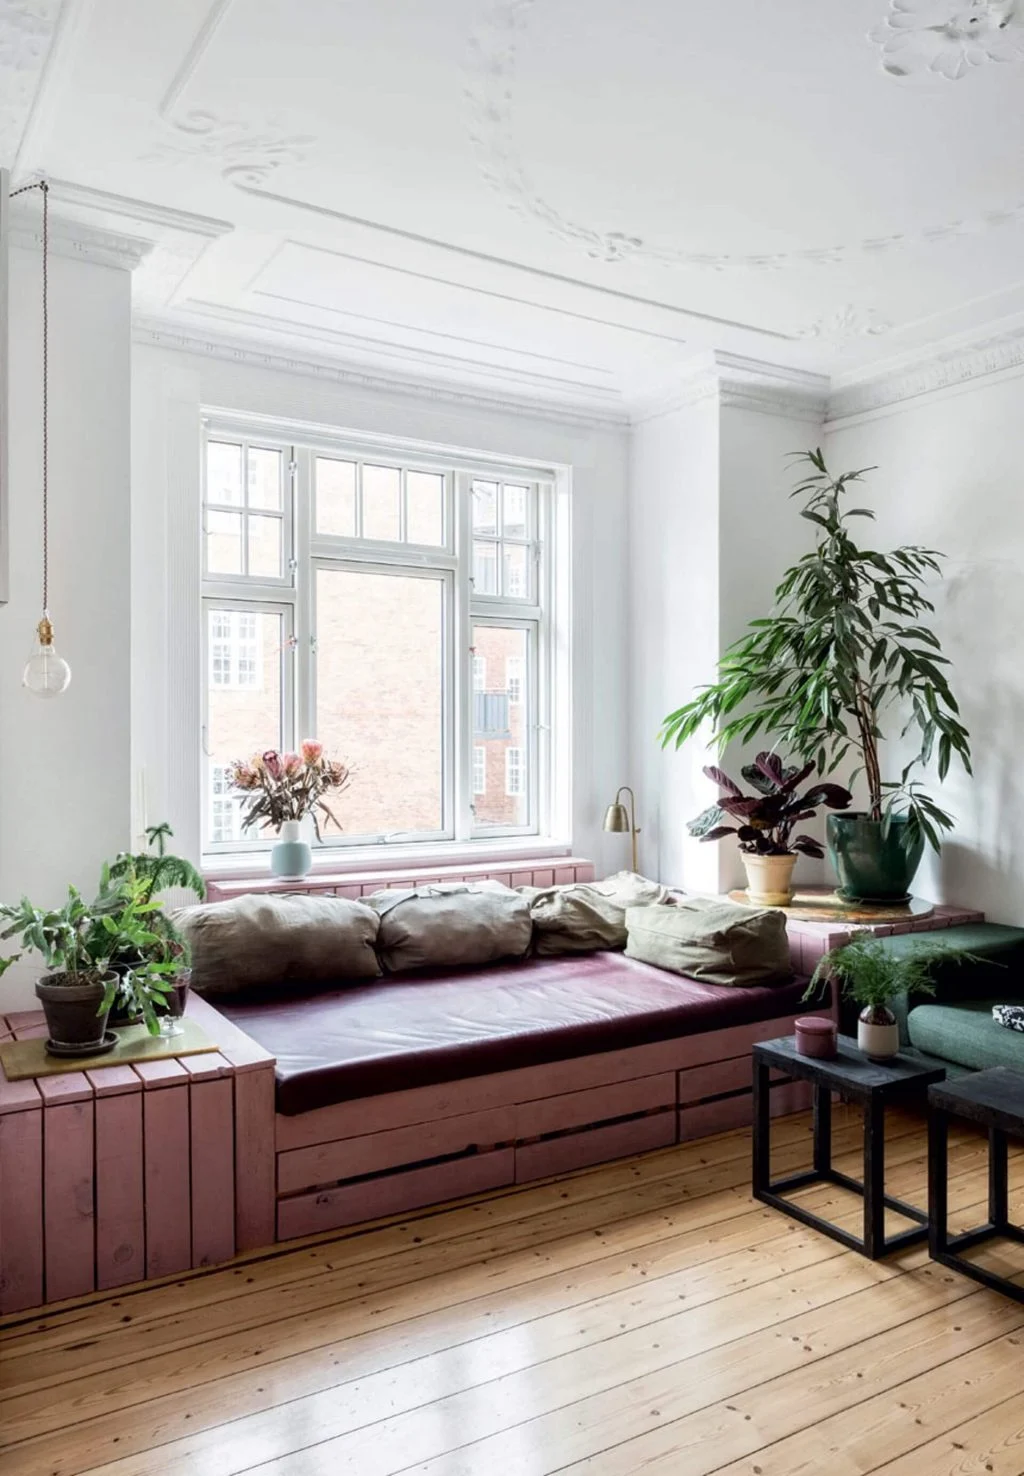 A living room filled with lots of furniture and plants
